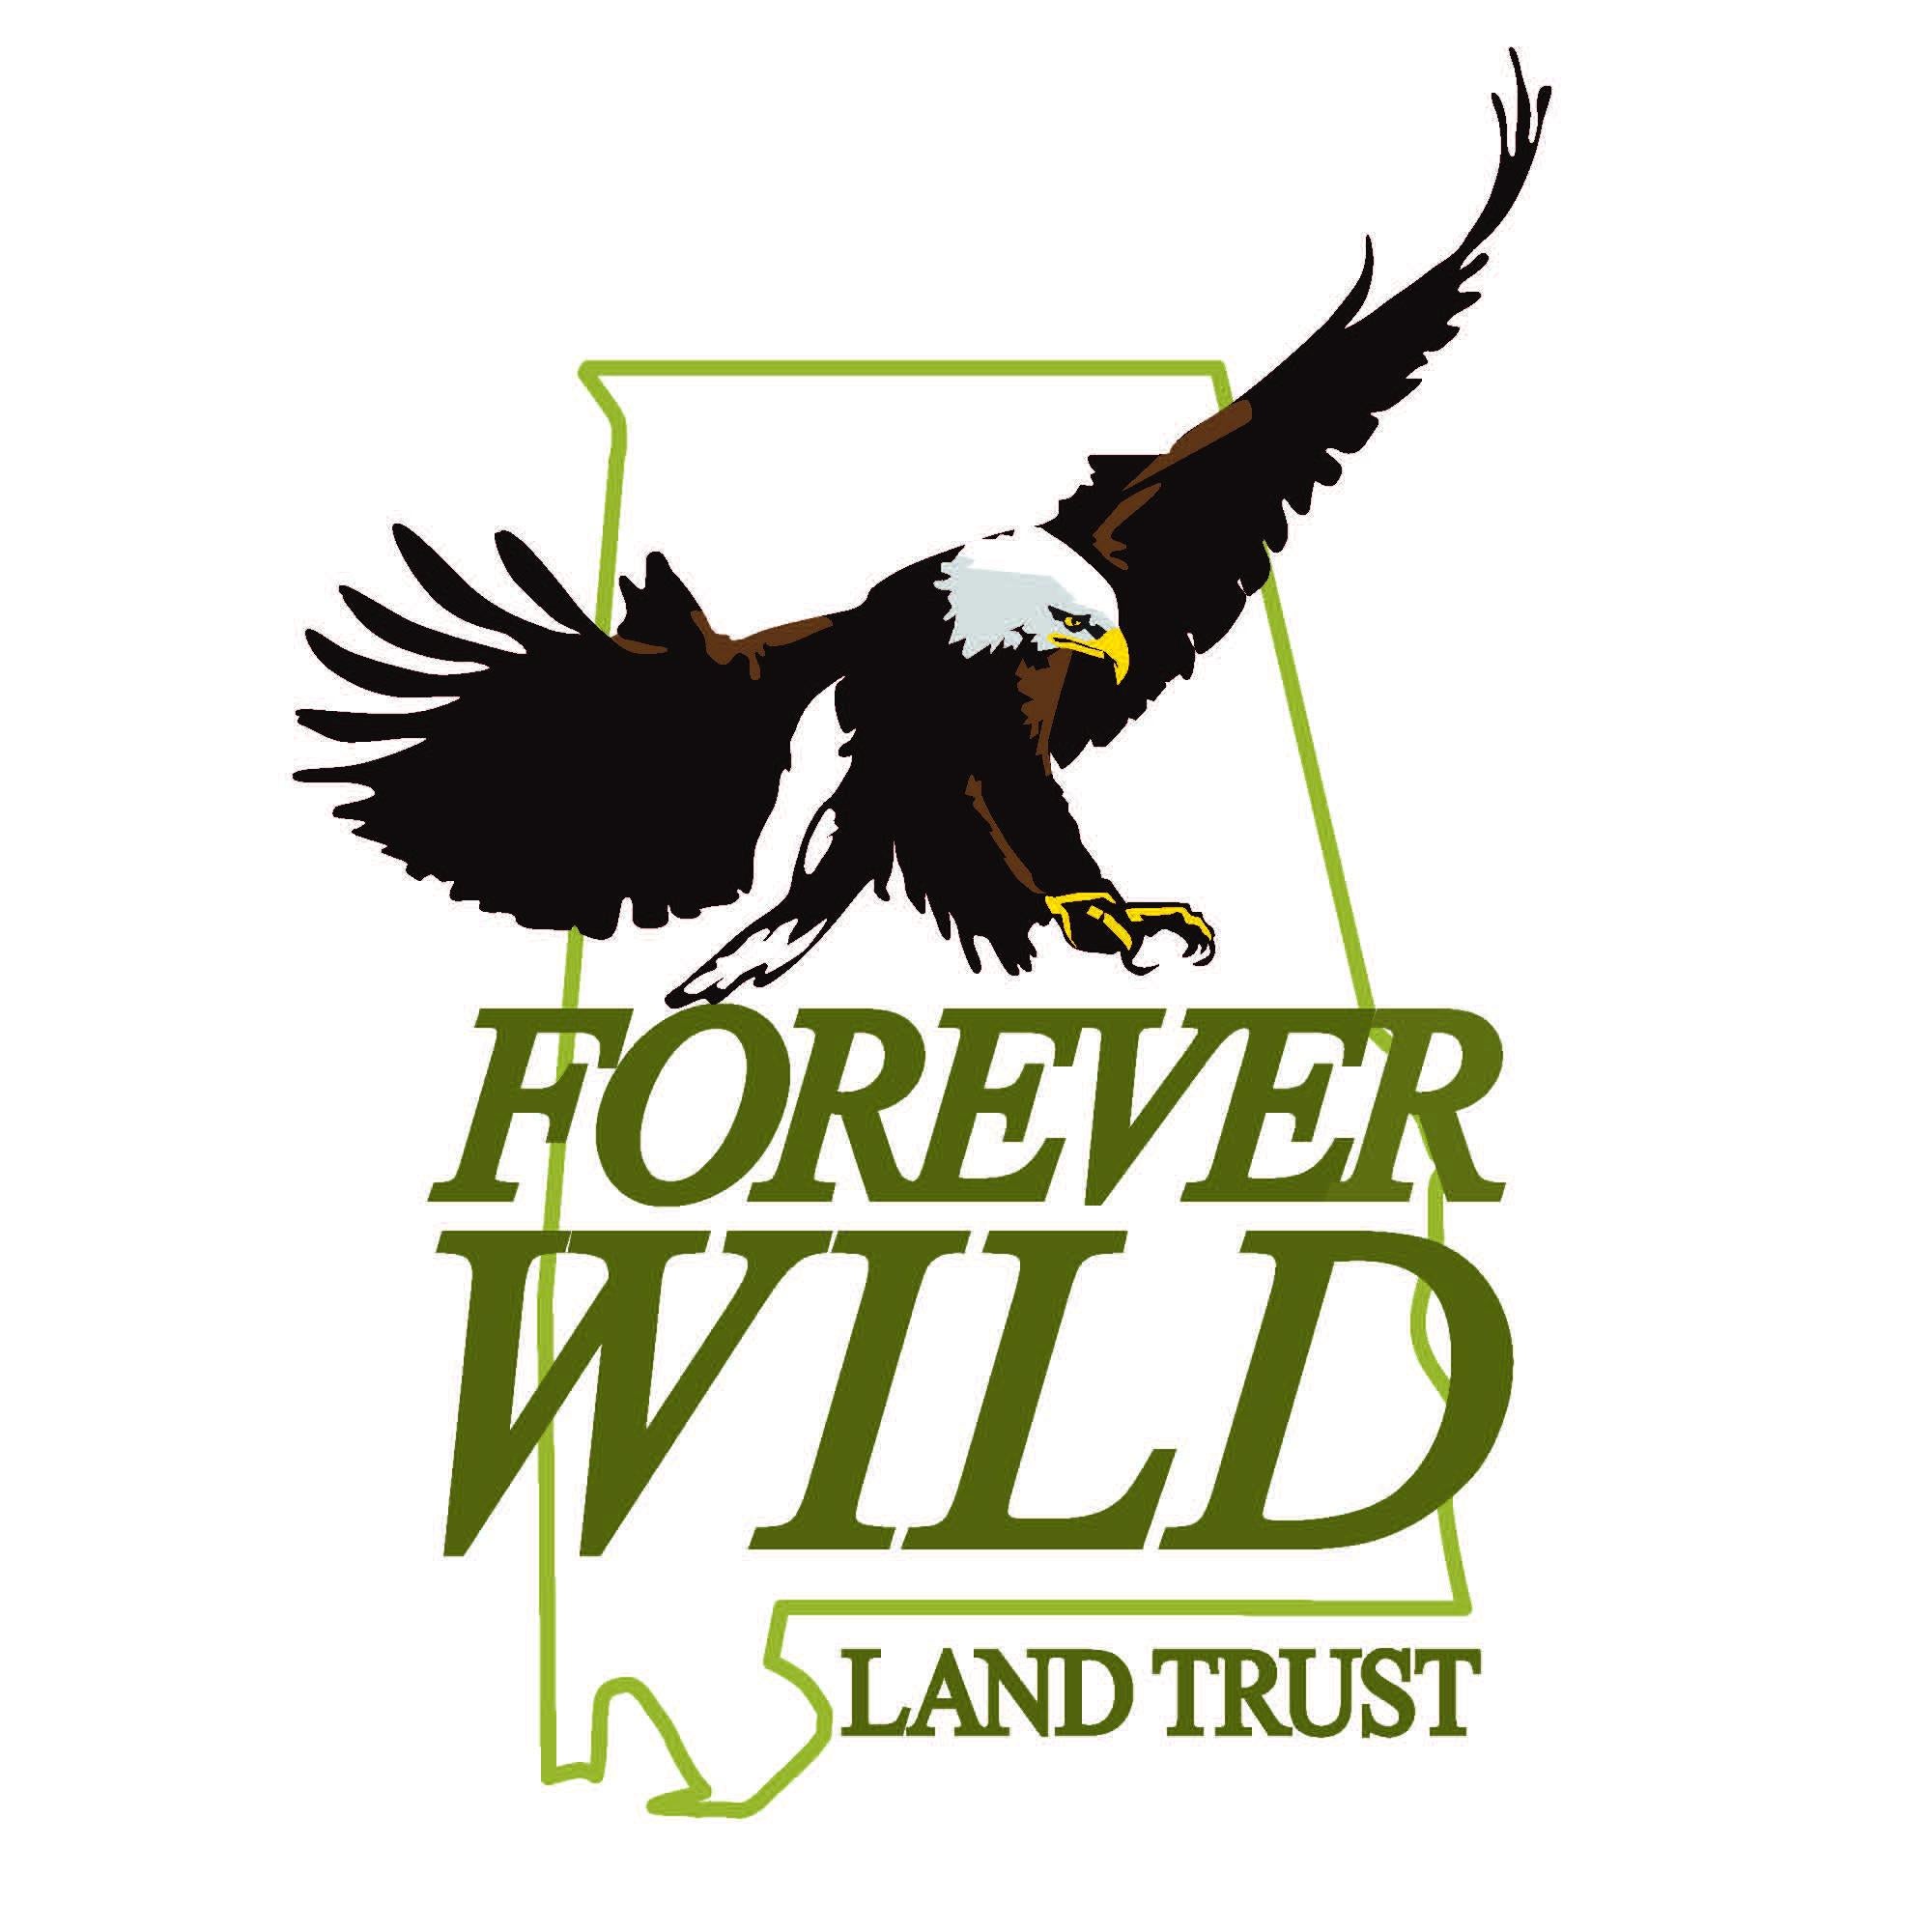 Forever Wild Board Meets in Oxford August 4